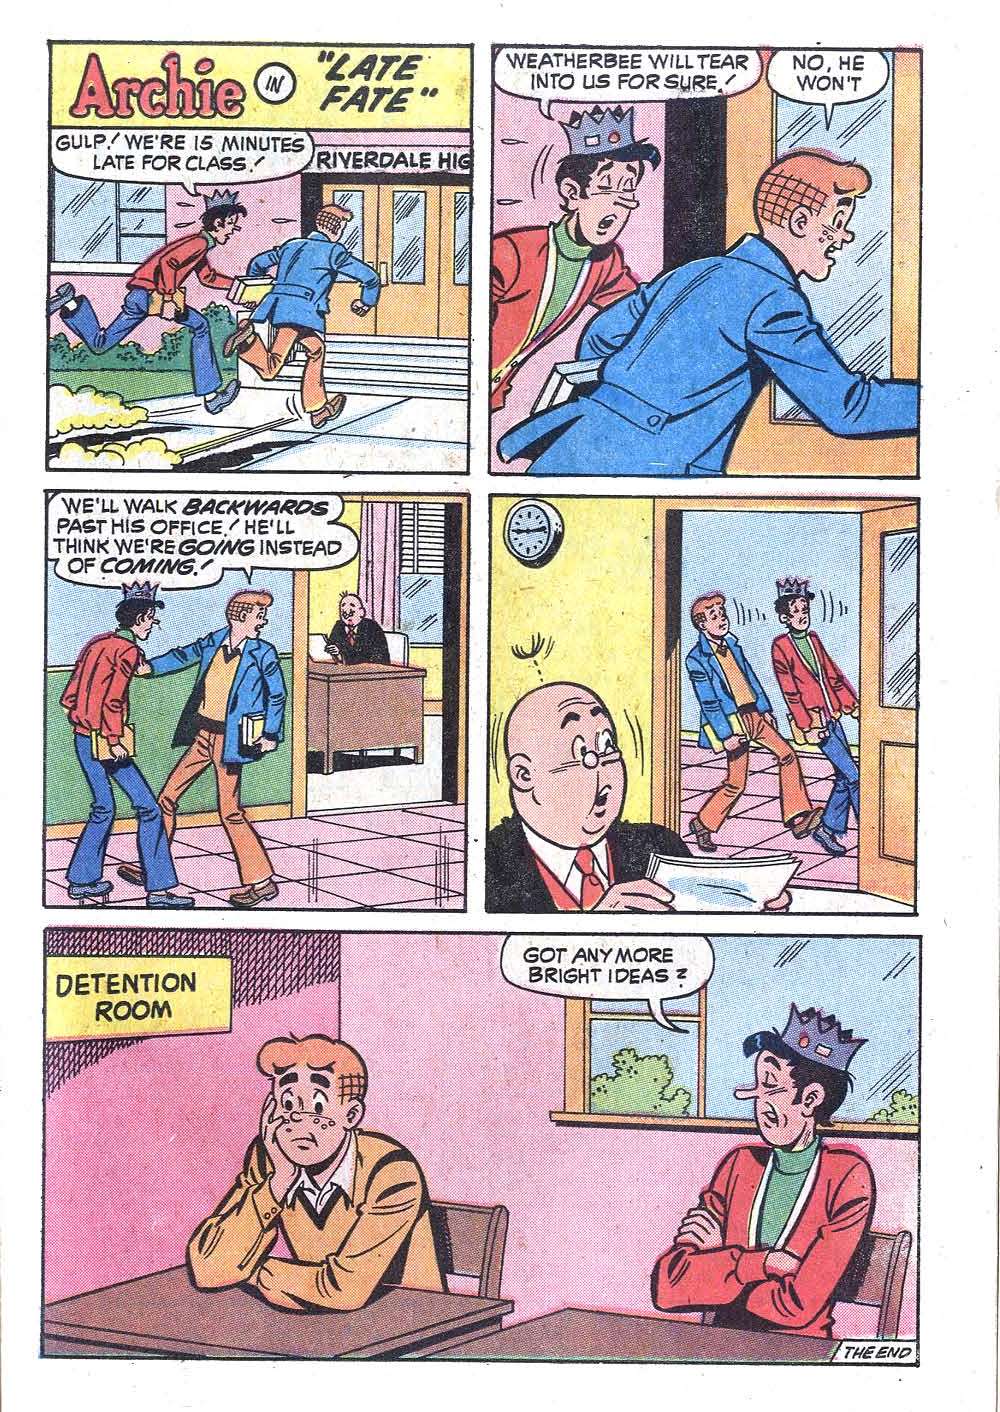 Archie (1960) 217 Page 11